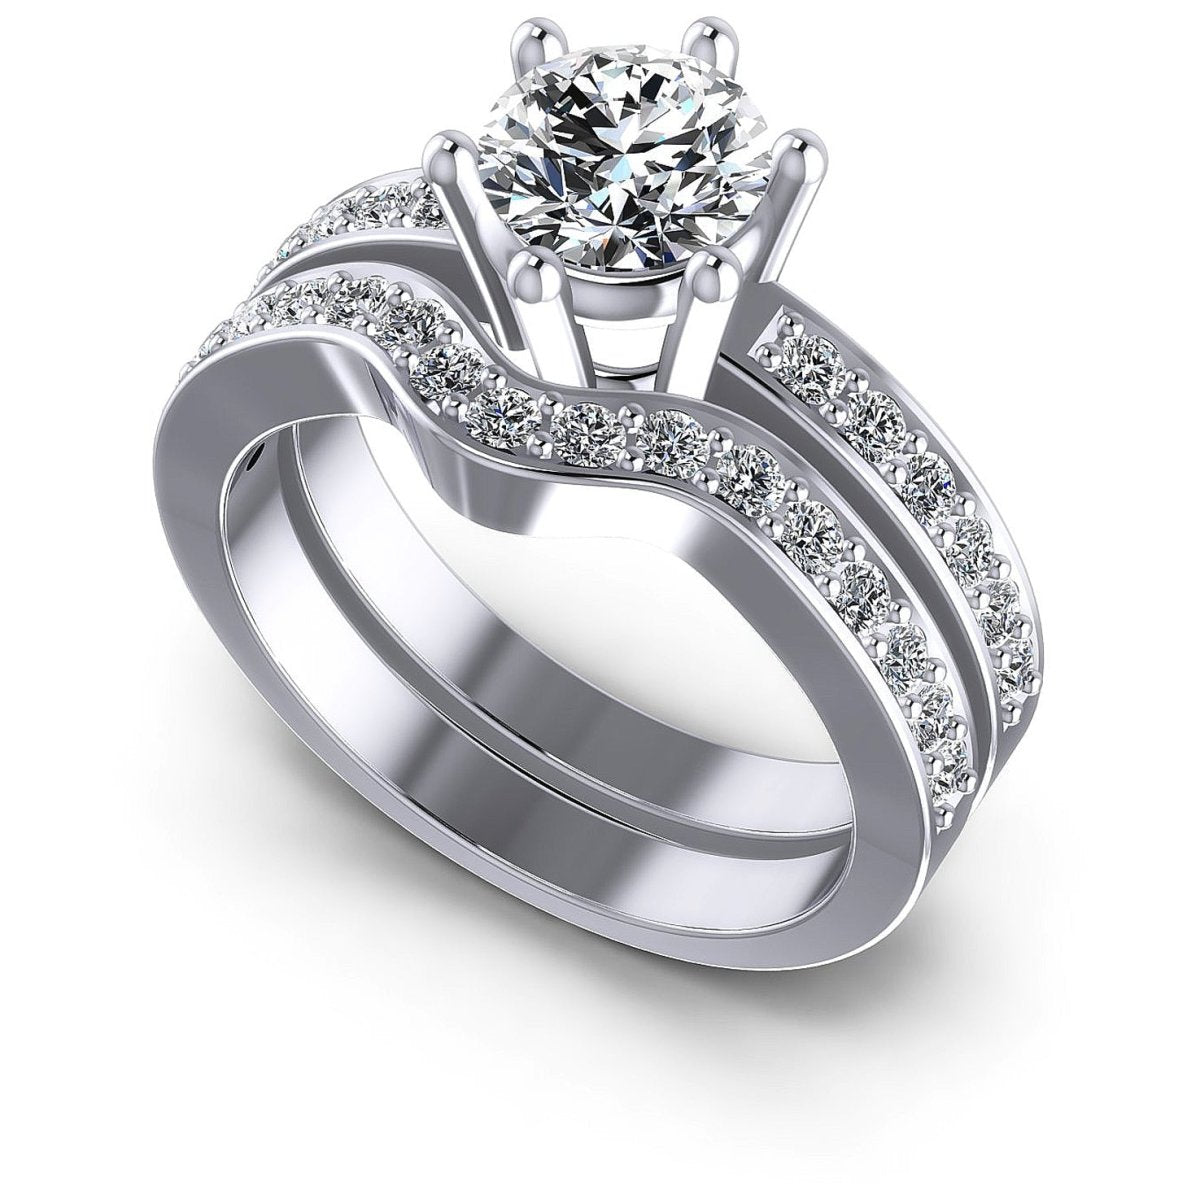 Special 0.95 CT Round Cut Diamond Bridal Set in 14 KT White Gold - Primestyle.com